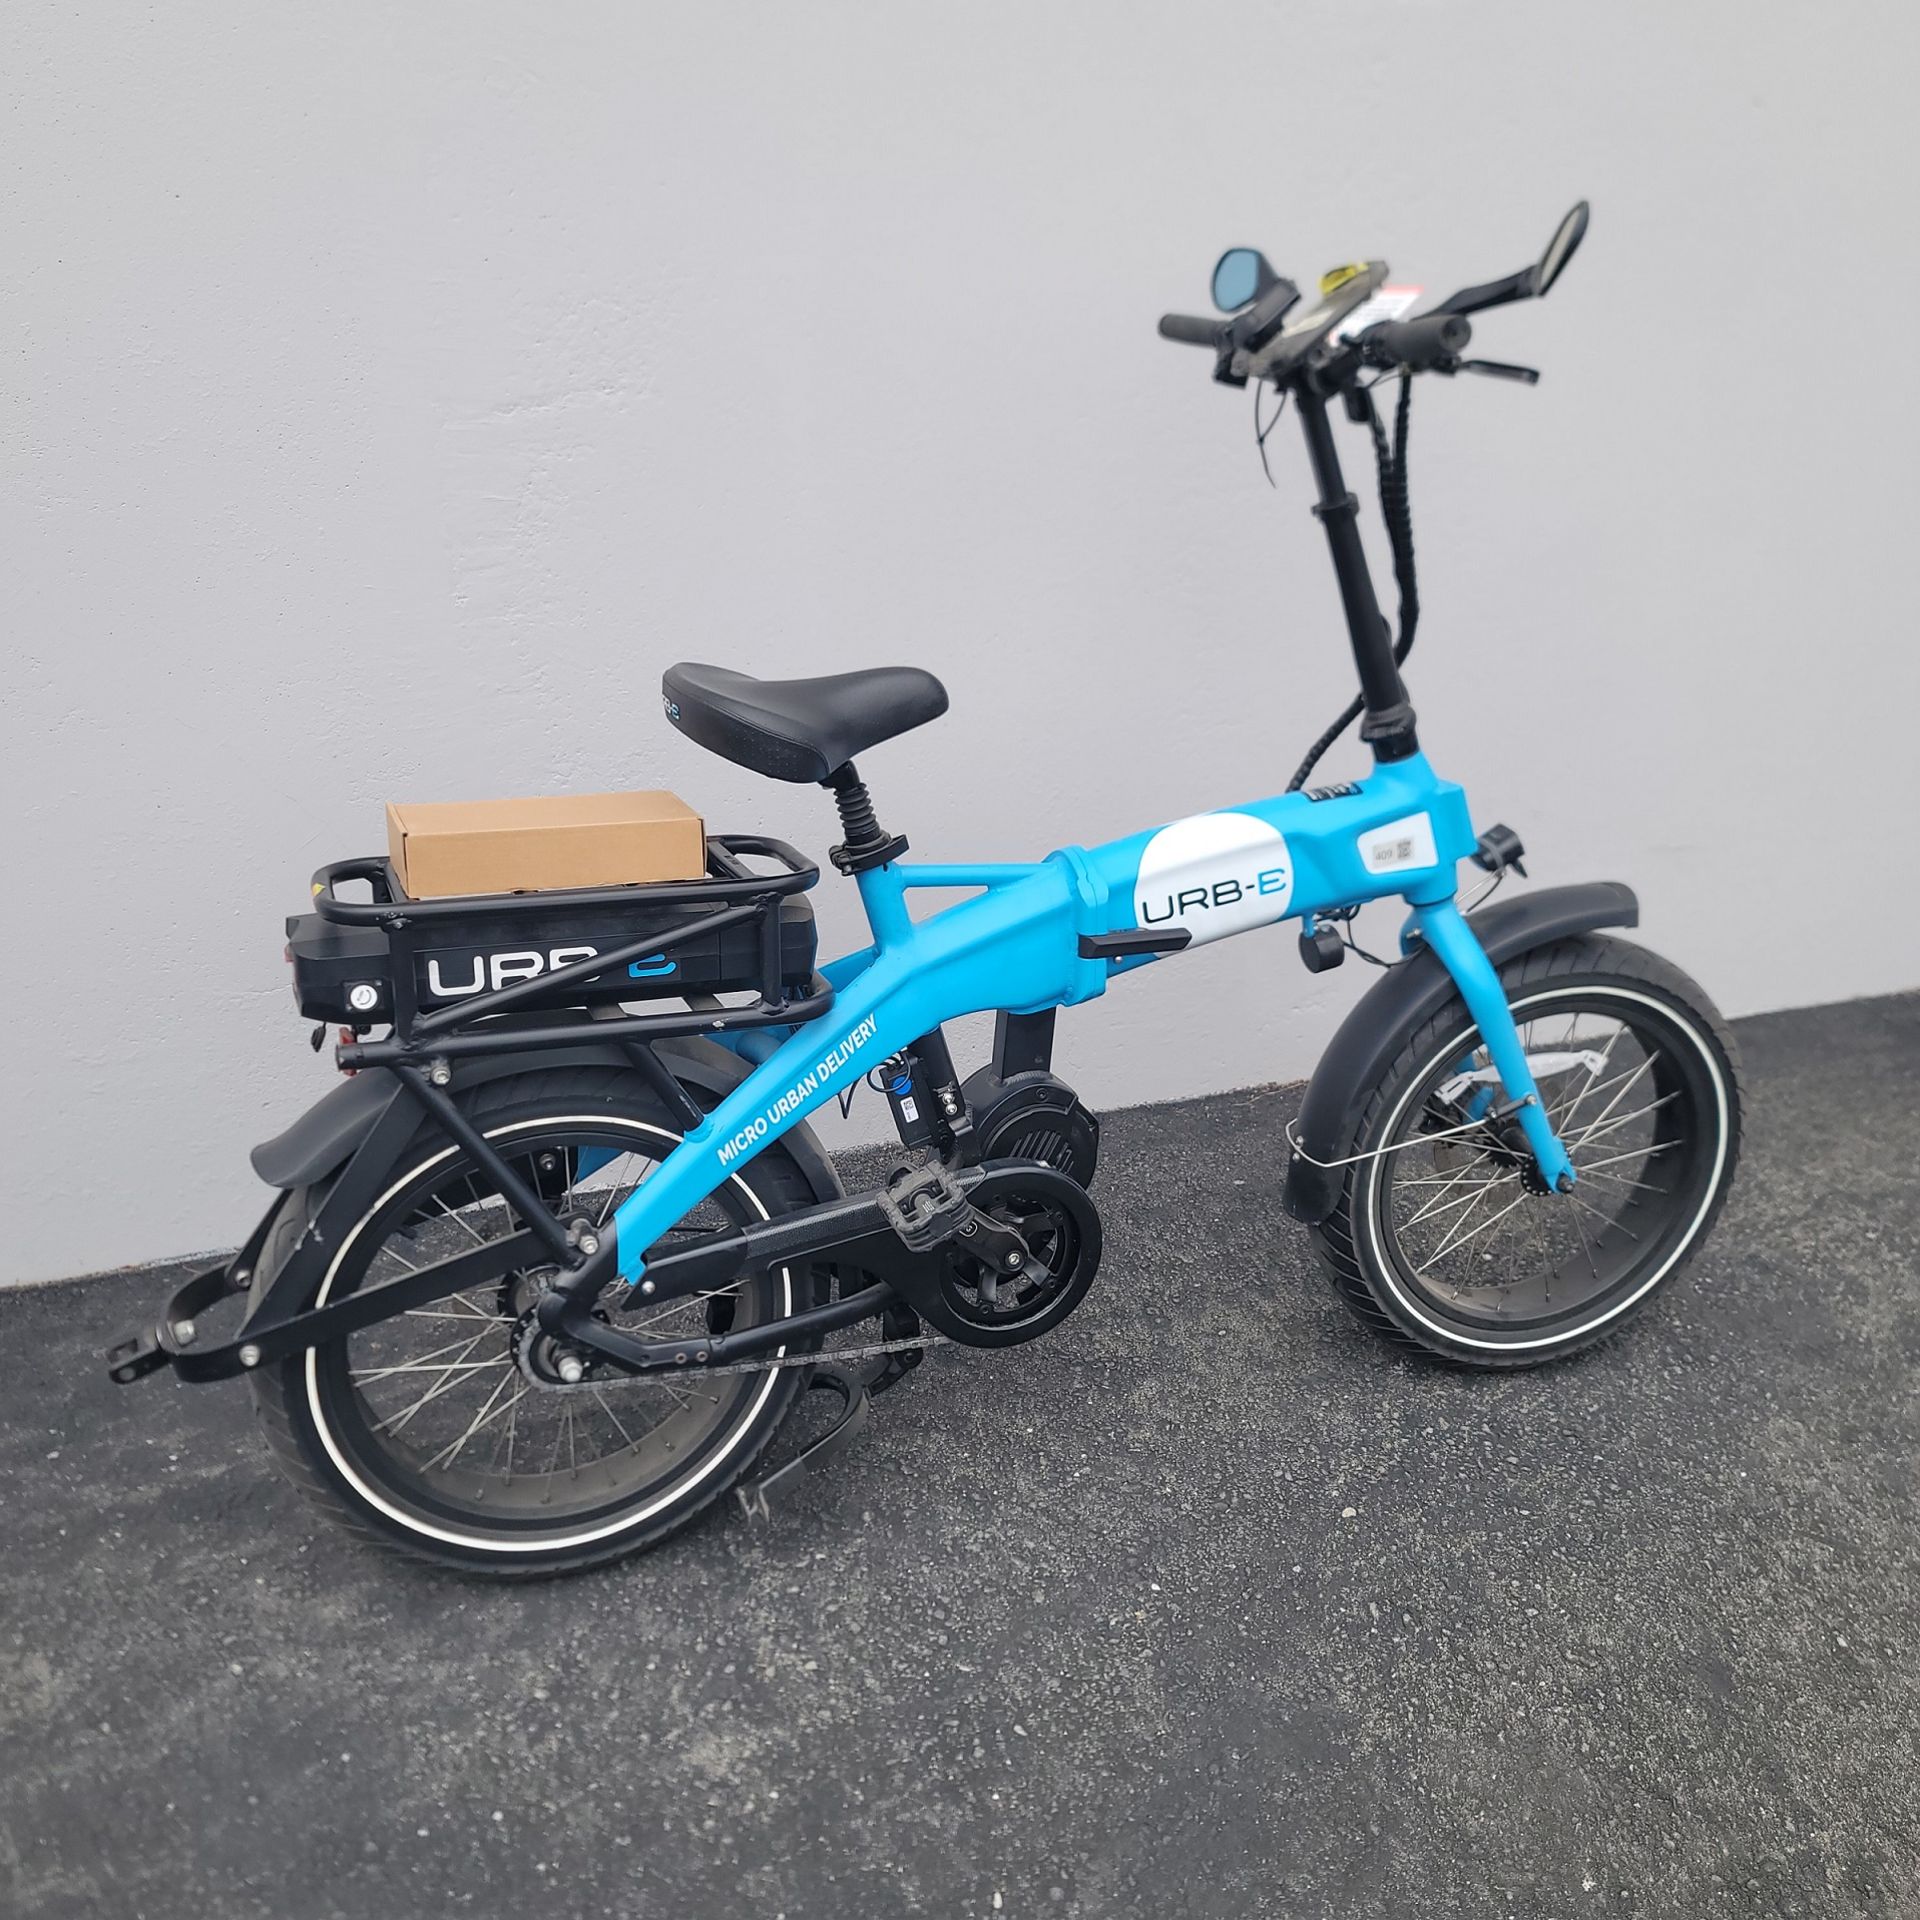 URB-E ELECTRIC DELIVERY BIKE, USED, 750W MID DRIVE MOTOR, SINGLE SPEED, THUMB THROTTLE WITH PEDAL - Image 2 of 3